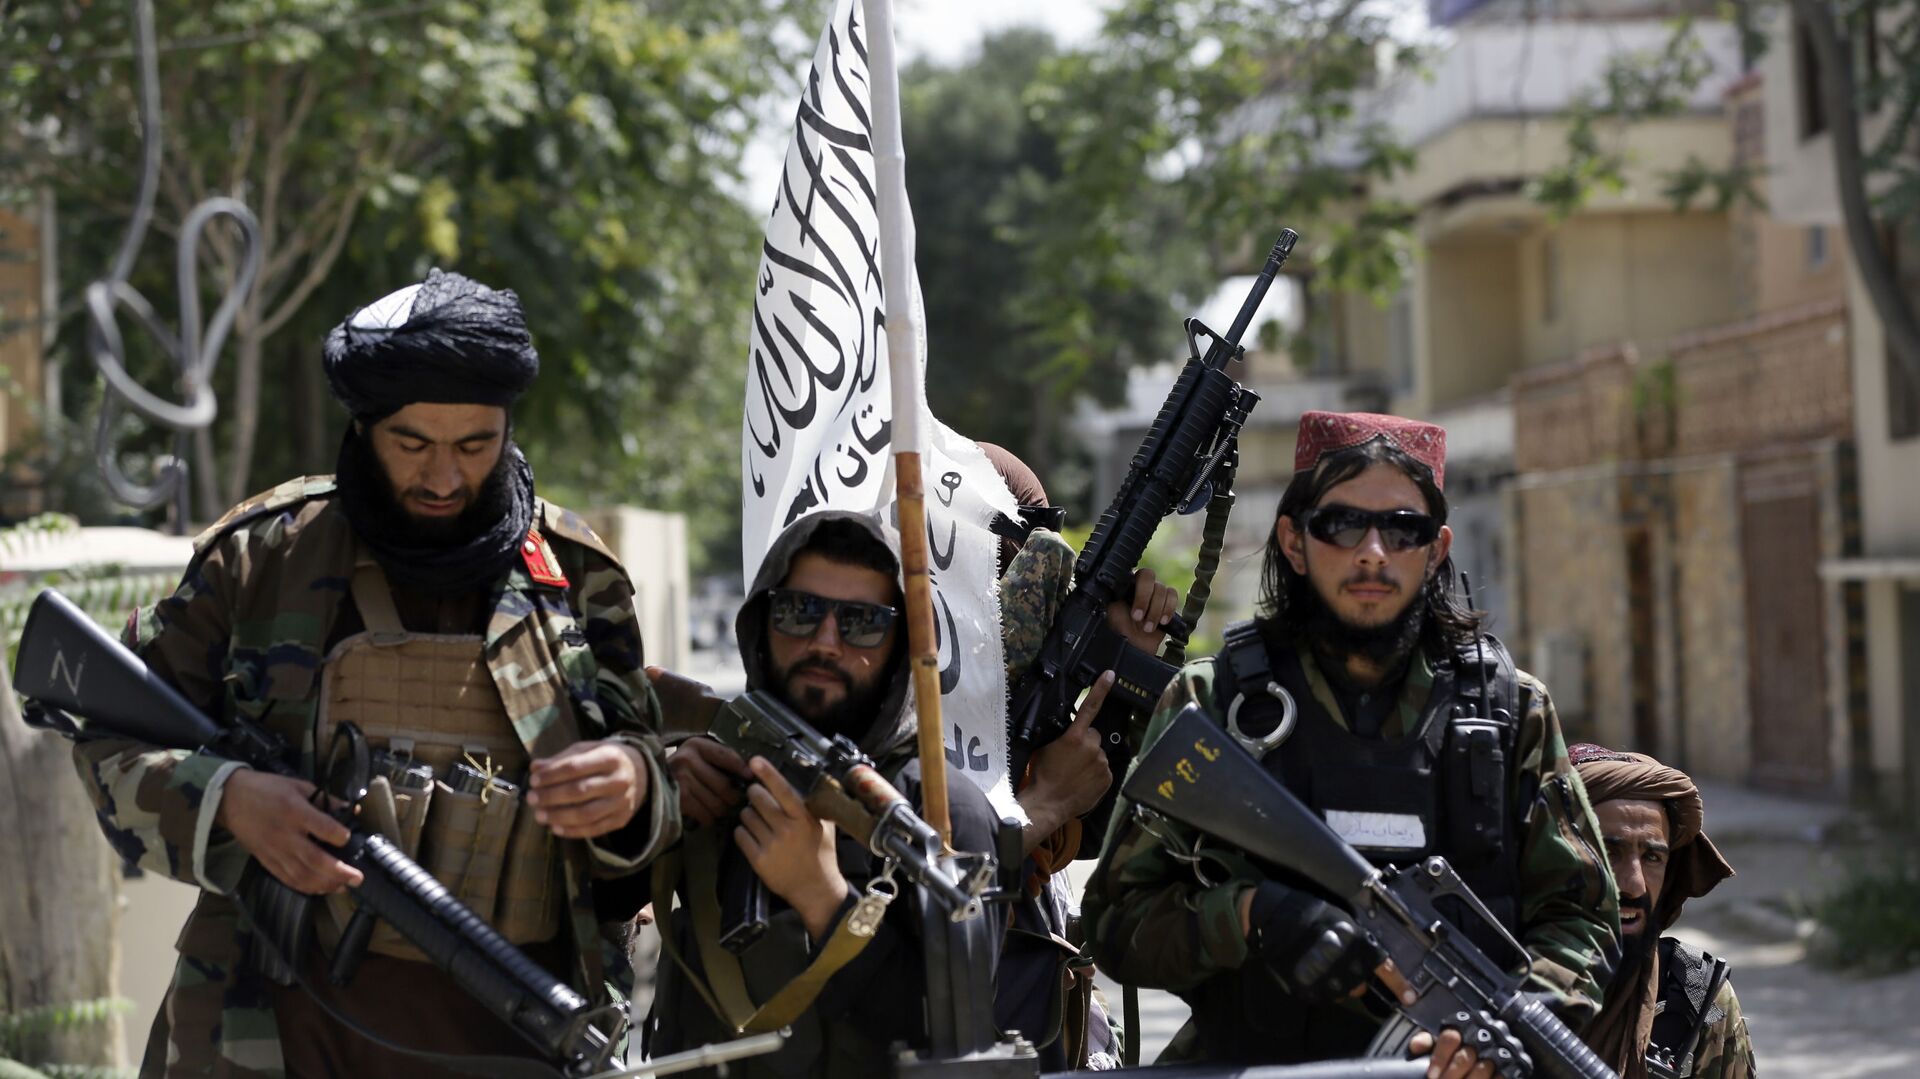 In this Aug. 19, 2021 file photo, Taliban fighters display their flag on patrol in Kabul, Afghanistan. When U.S. President Joe Biden took office early this year, Western allies were falling over themselves to welcome and praise him and hail a new era in trans-Atlantic cooperation. - Sputnik International, 1920, 01.09.2021